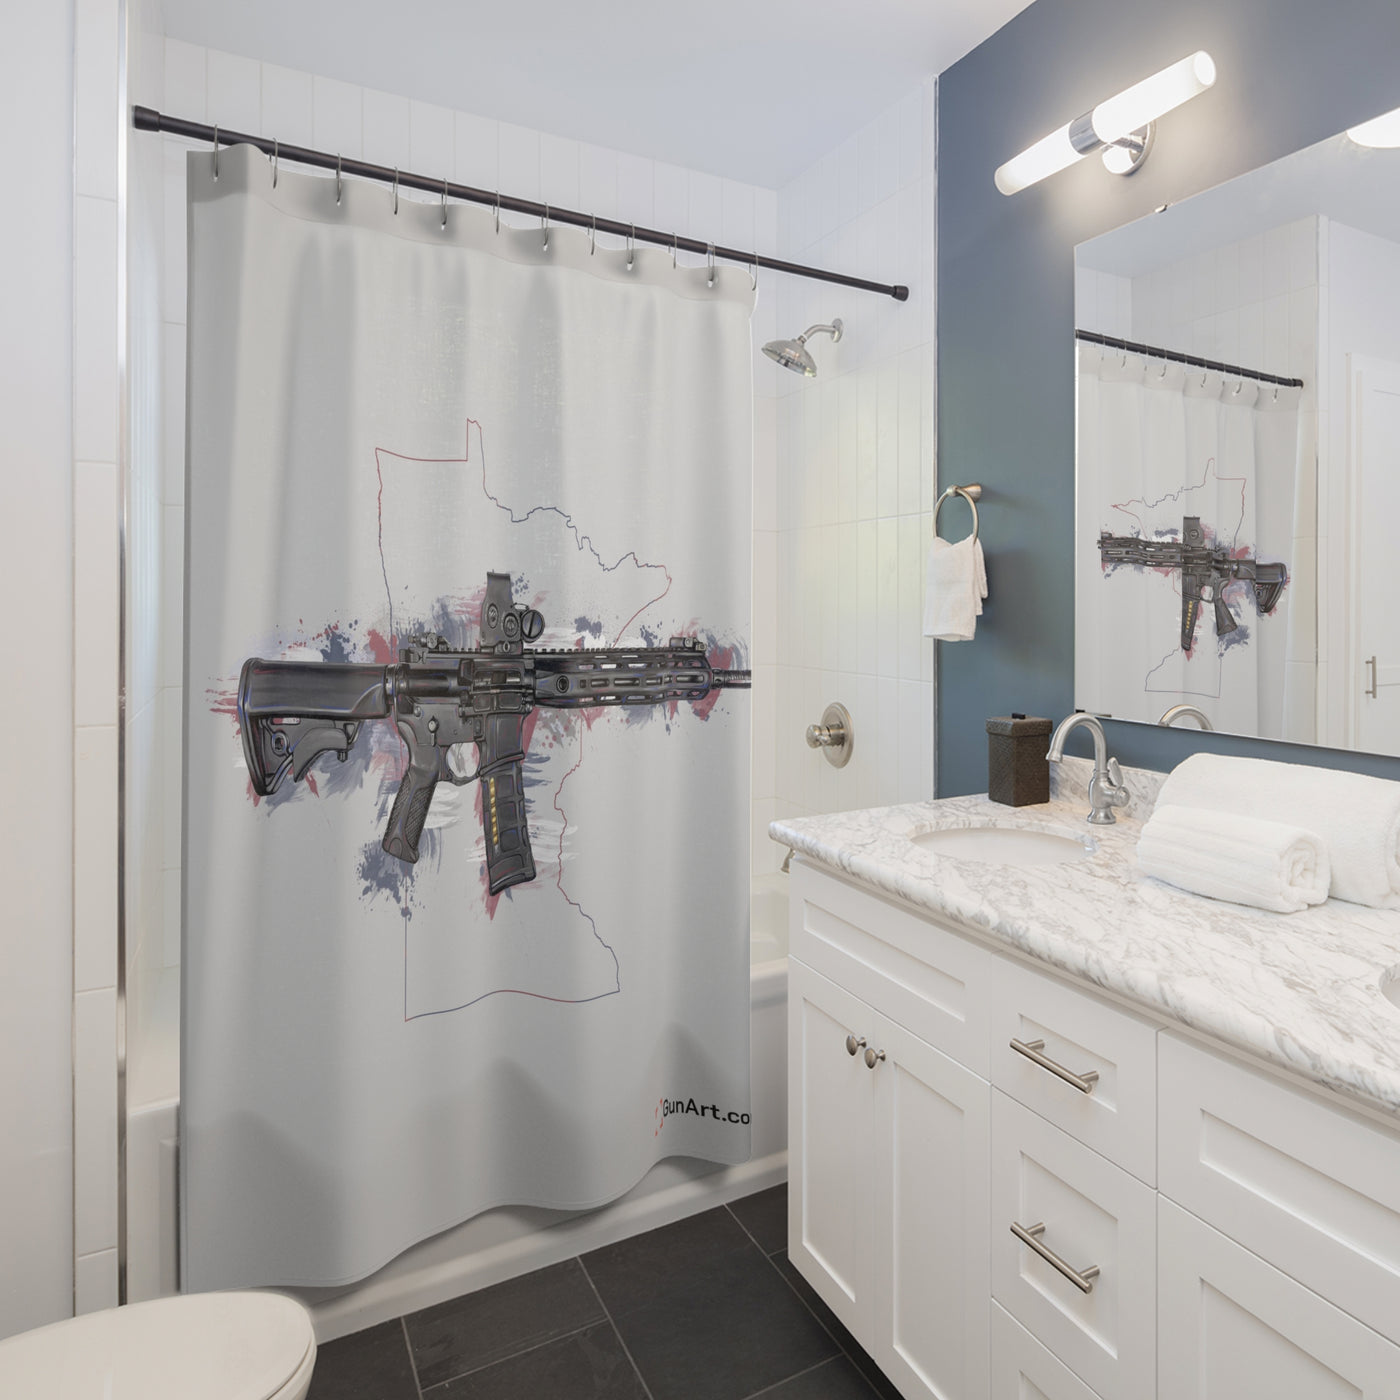 Defending Freedom - Minnesota - AR-15 State Shower Curtains - Colored State